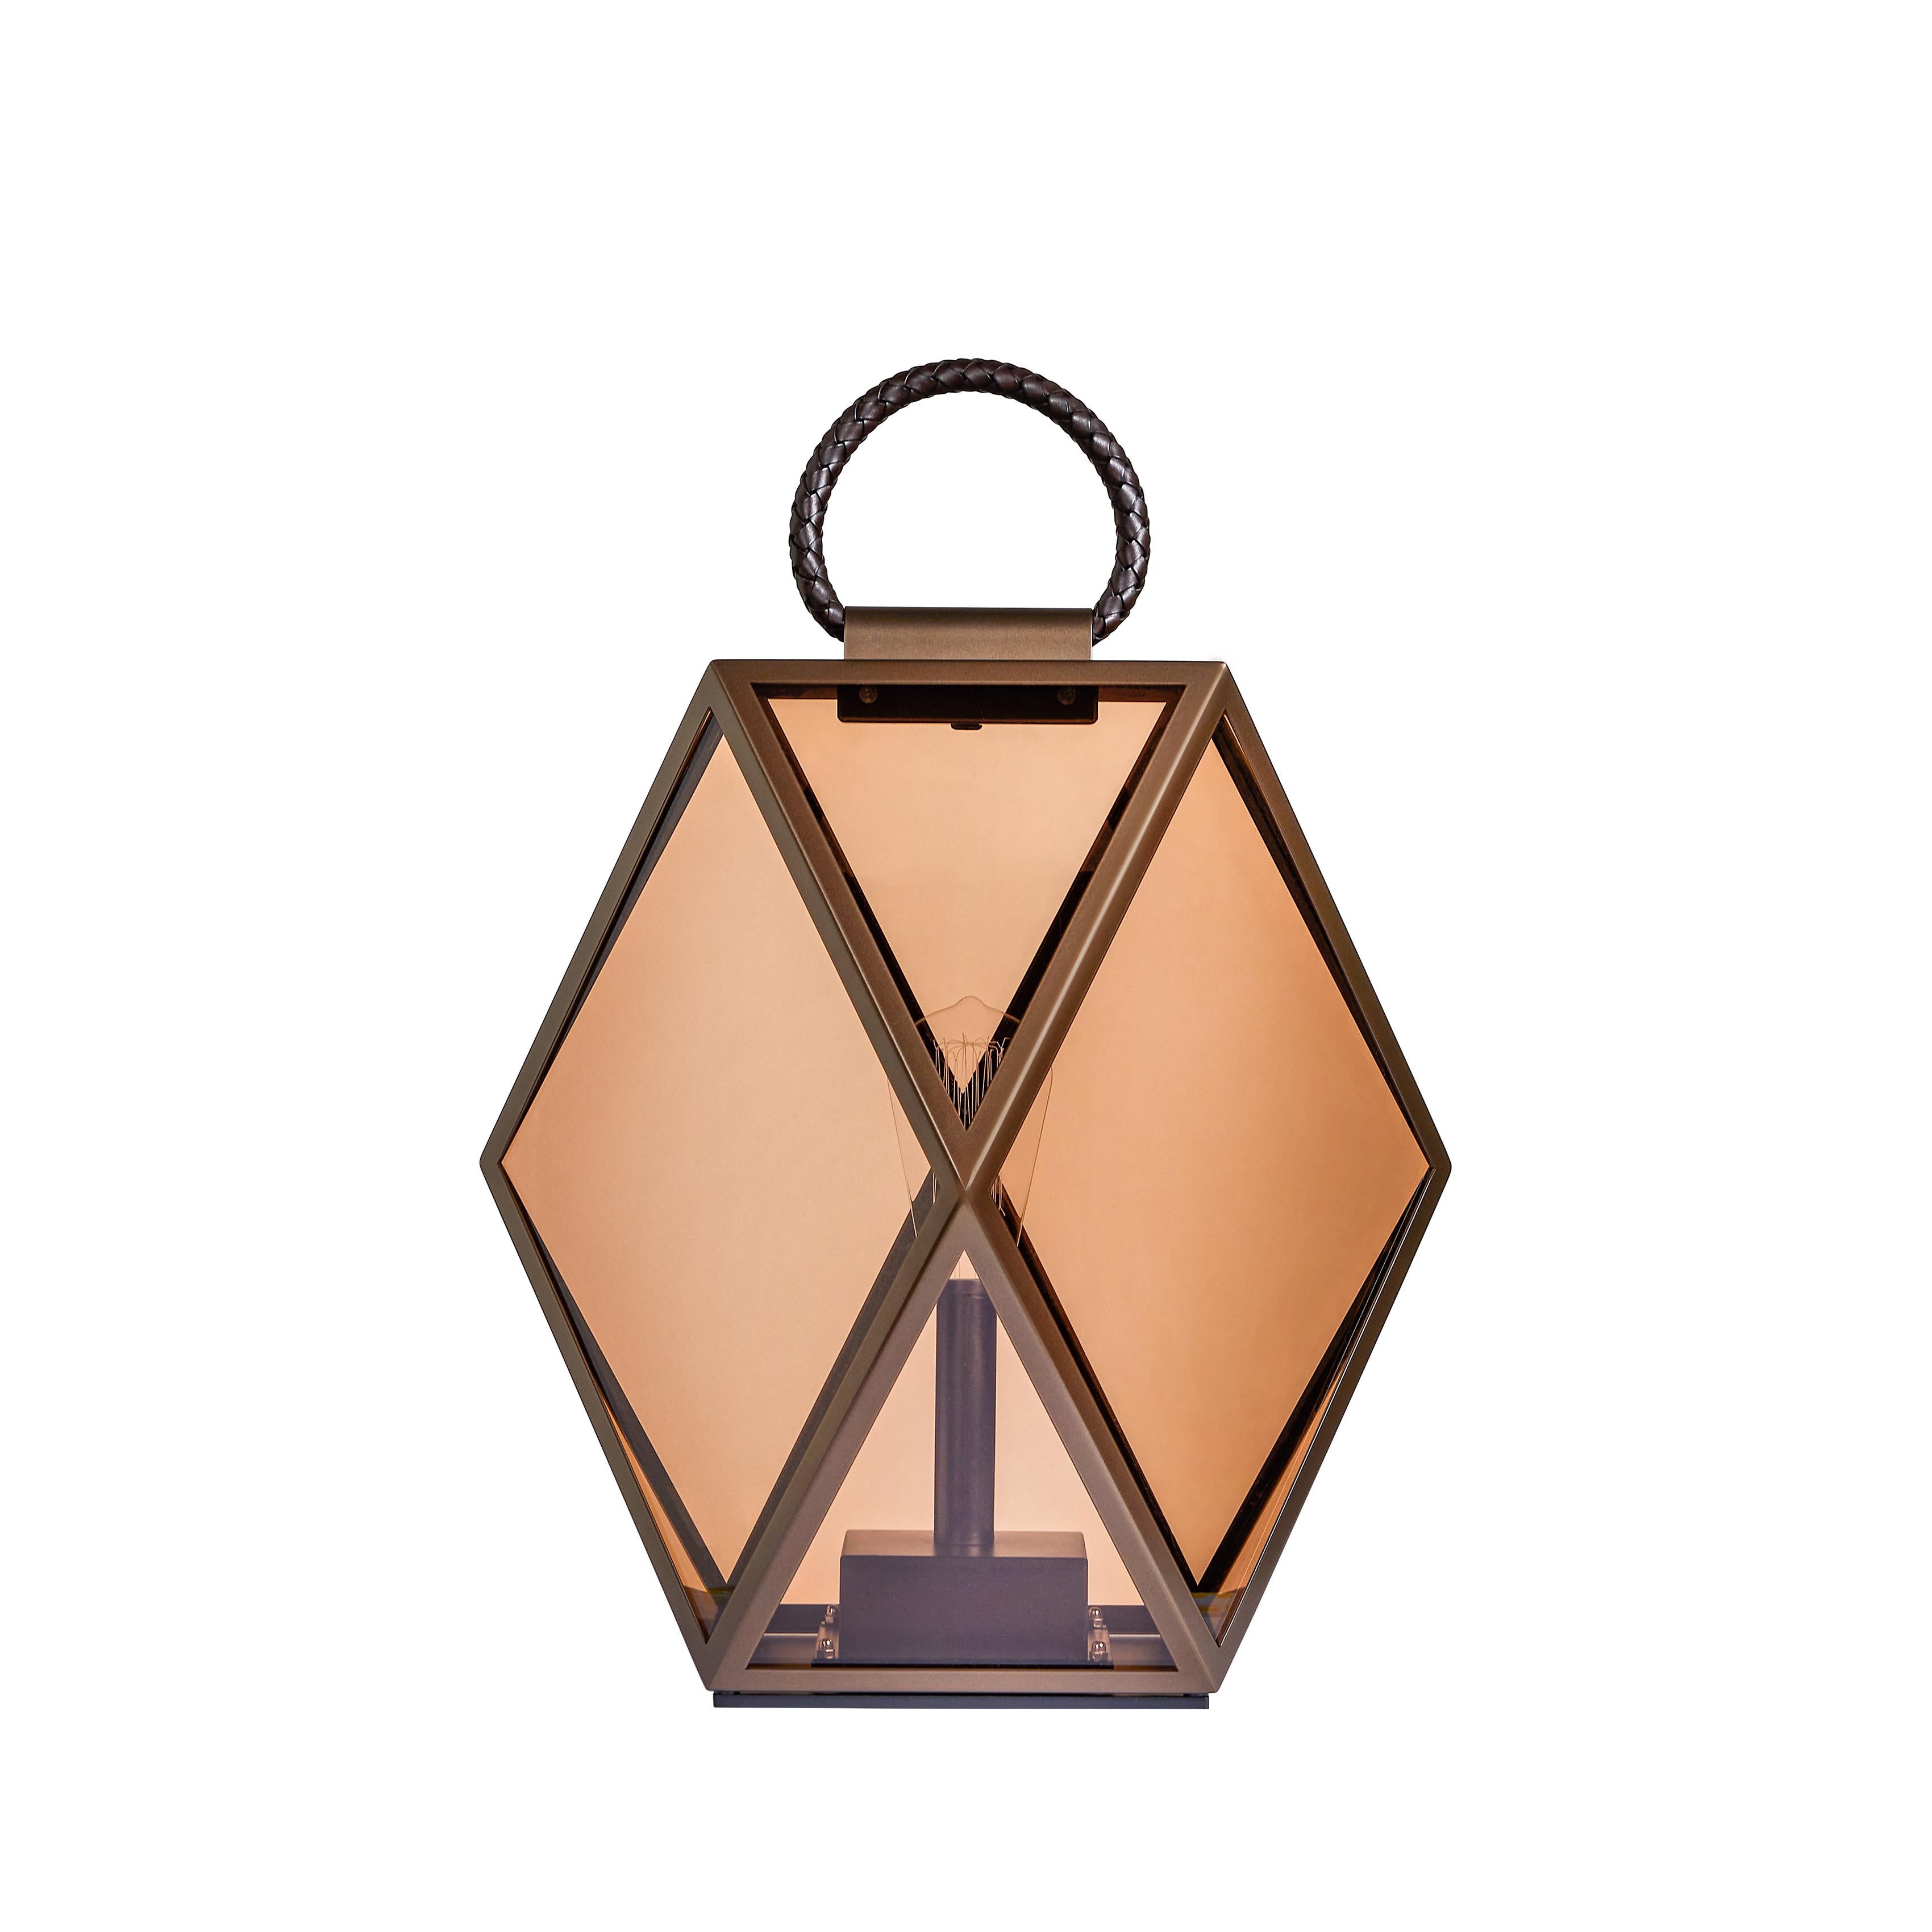 The bronze finish of Muse Lantern has been treated to resist in outdoor spaces and weathering, with a braided leather handle. The plastic diffuser in the Lantern version keep the transparent amber finish.
 